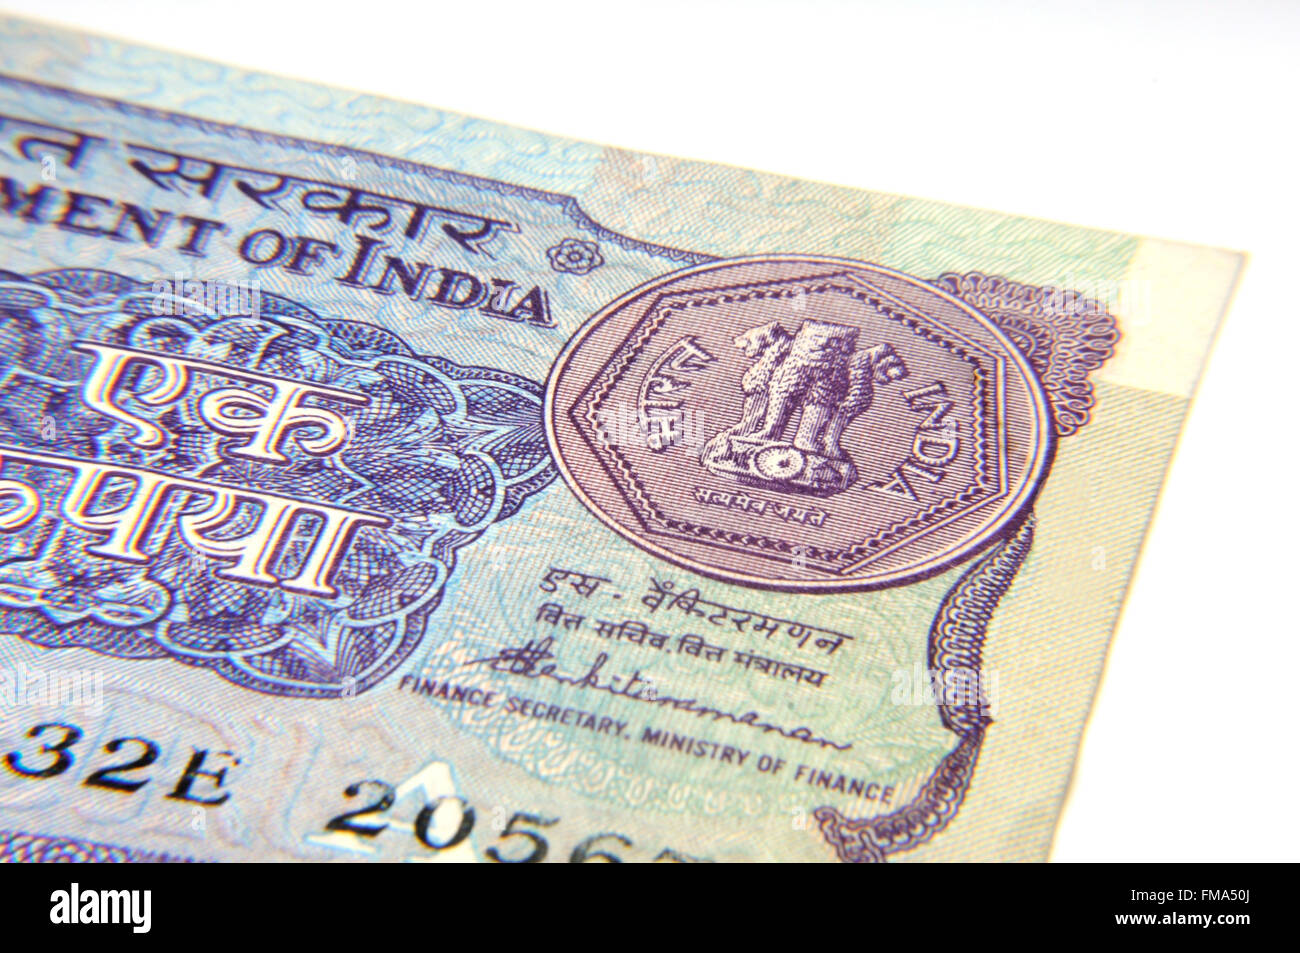 A one rupee note closeup (Indian Currency) Stock Photo